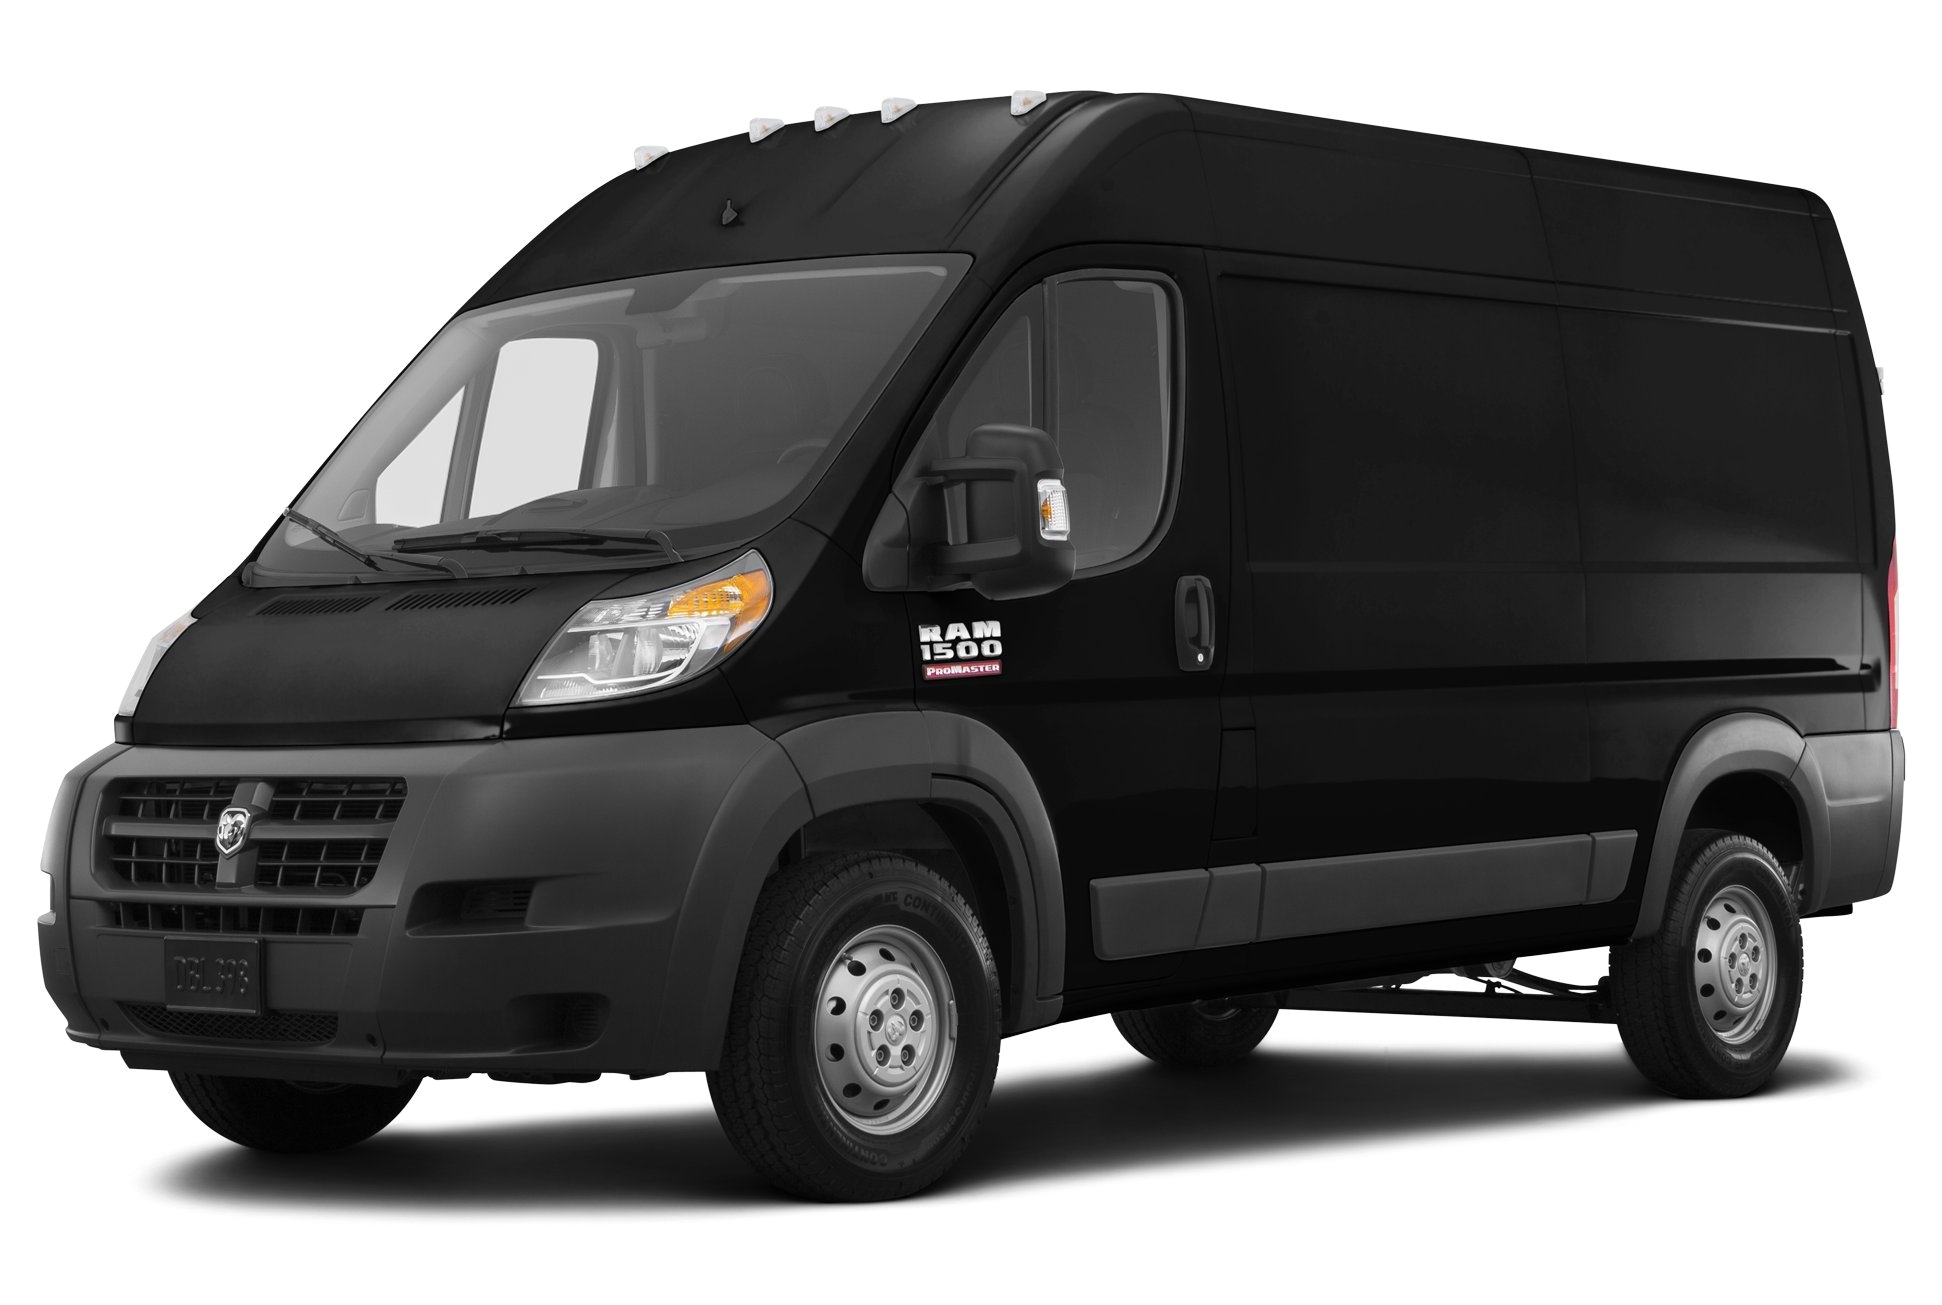 2015 Ram Promaster Interior Dimensions Amazon Com 2016 Ram Promaster 3500 Reviews Images and Specs Vehicles